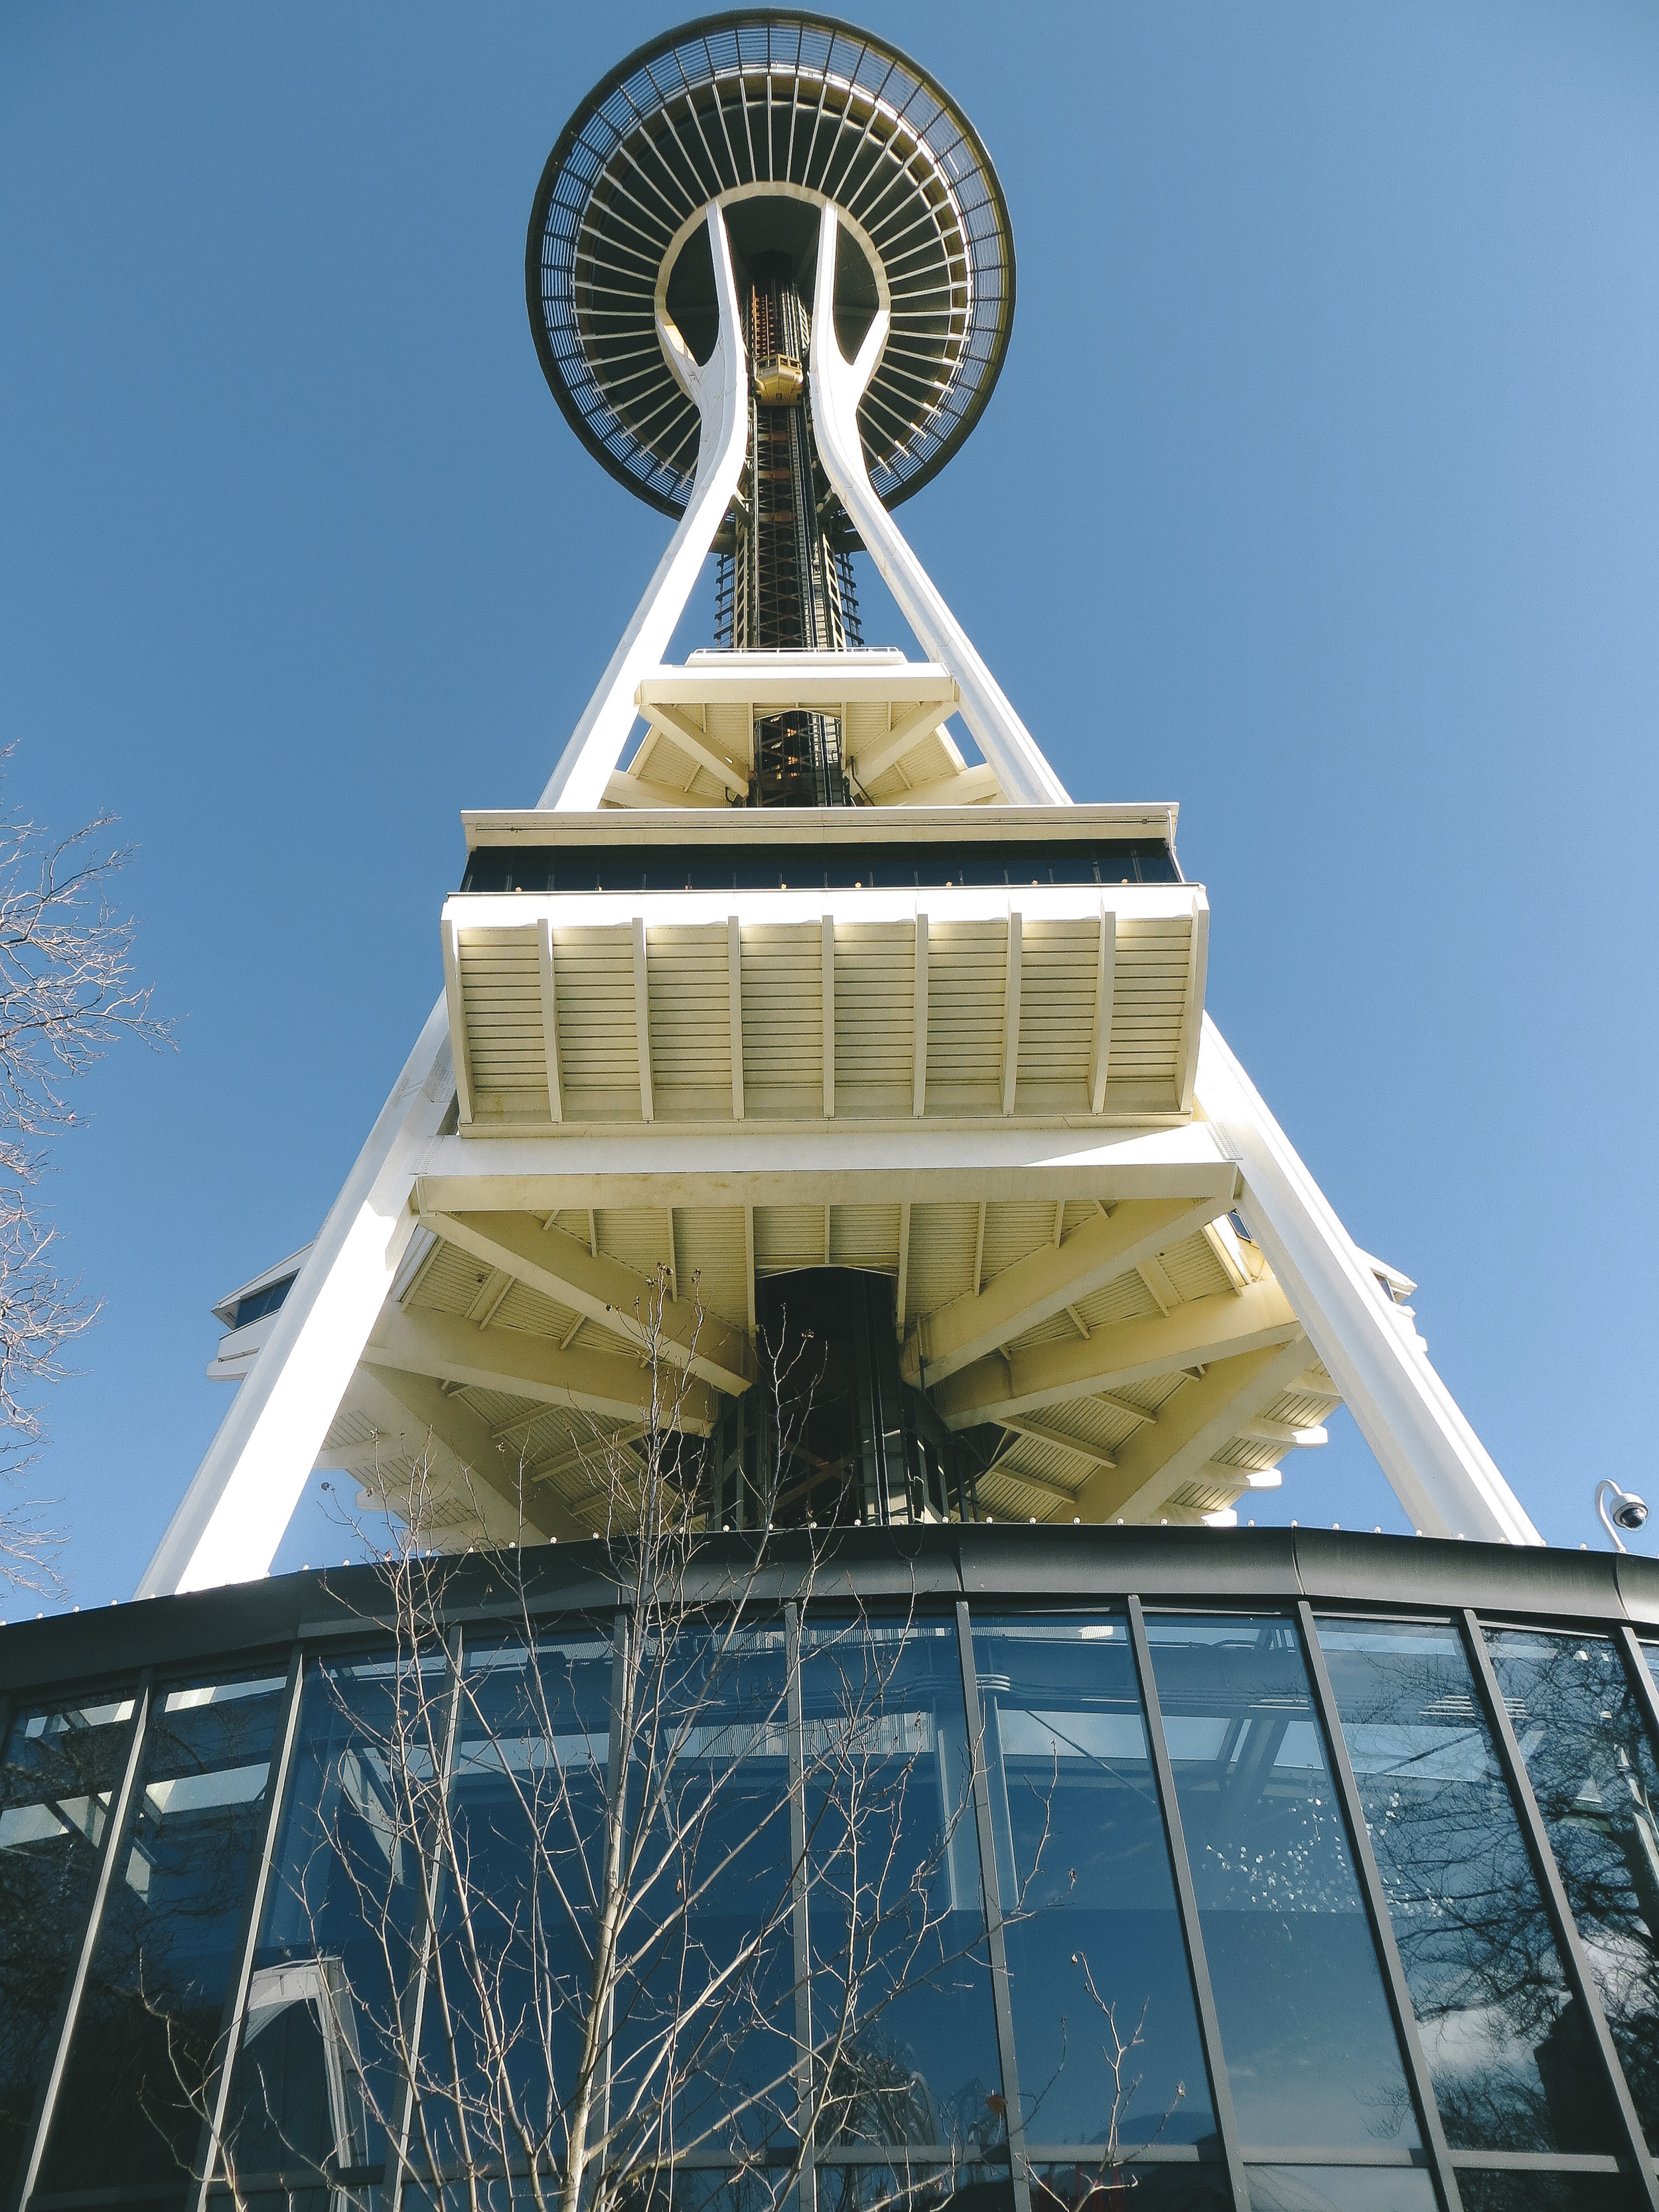 Insiders guide to seattle -space needle - www.letsregale.com - pacific northwest travel blogger 3.jpg